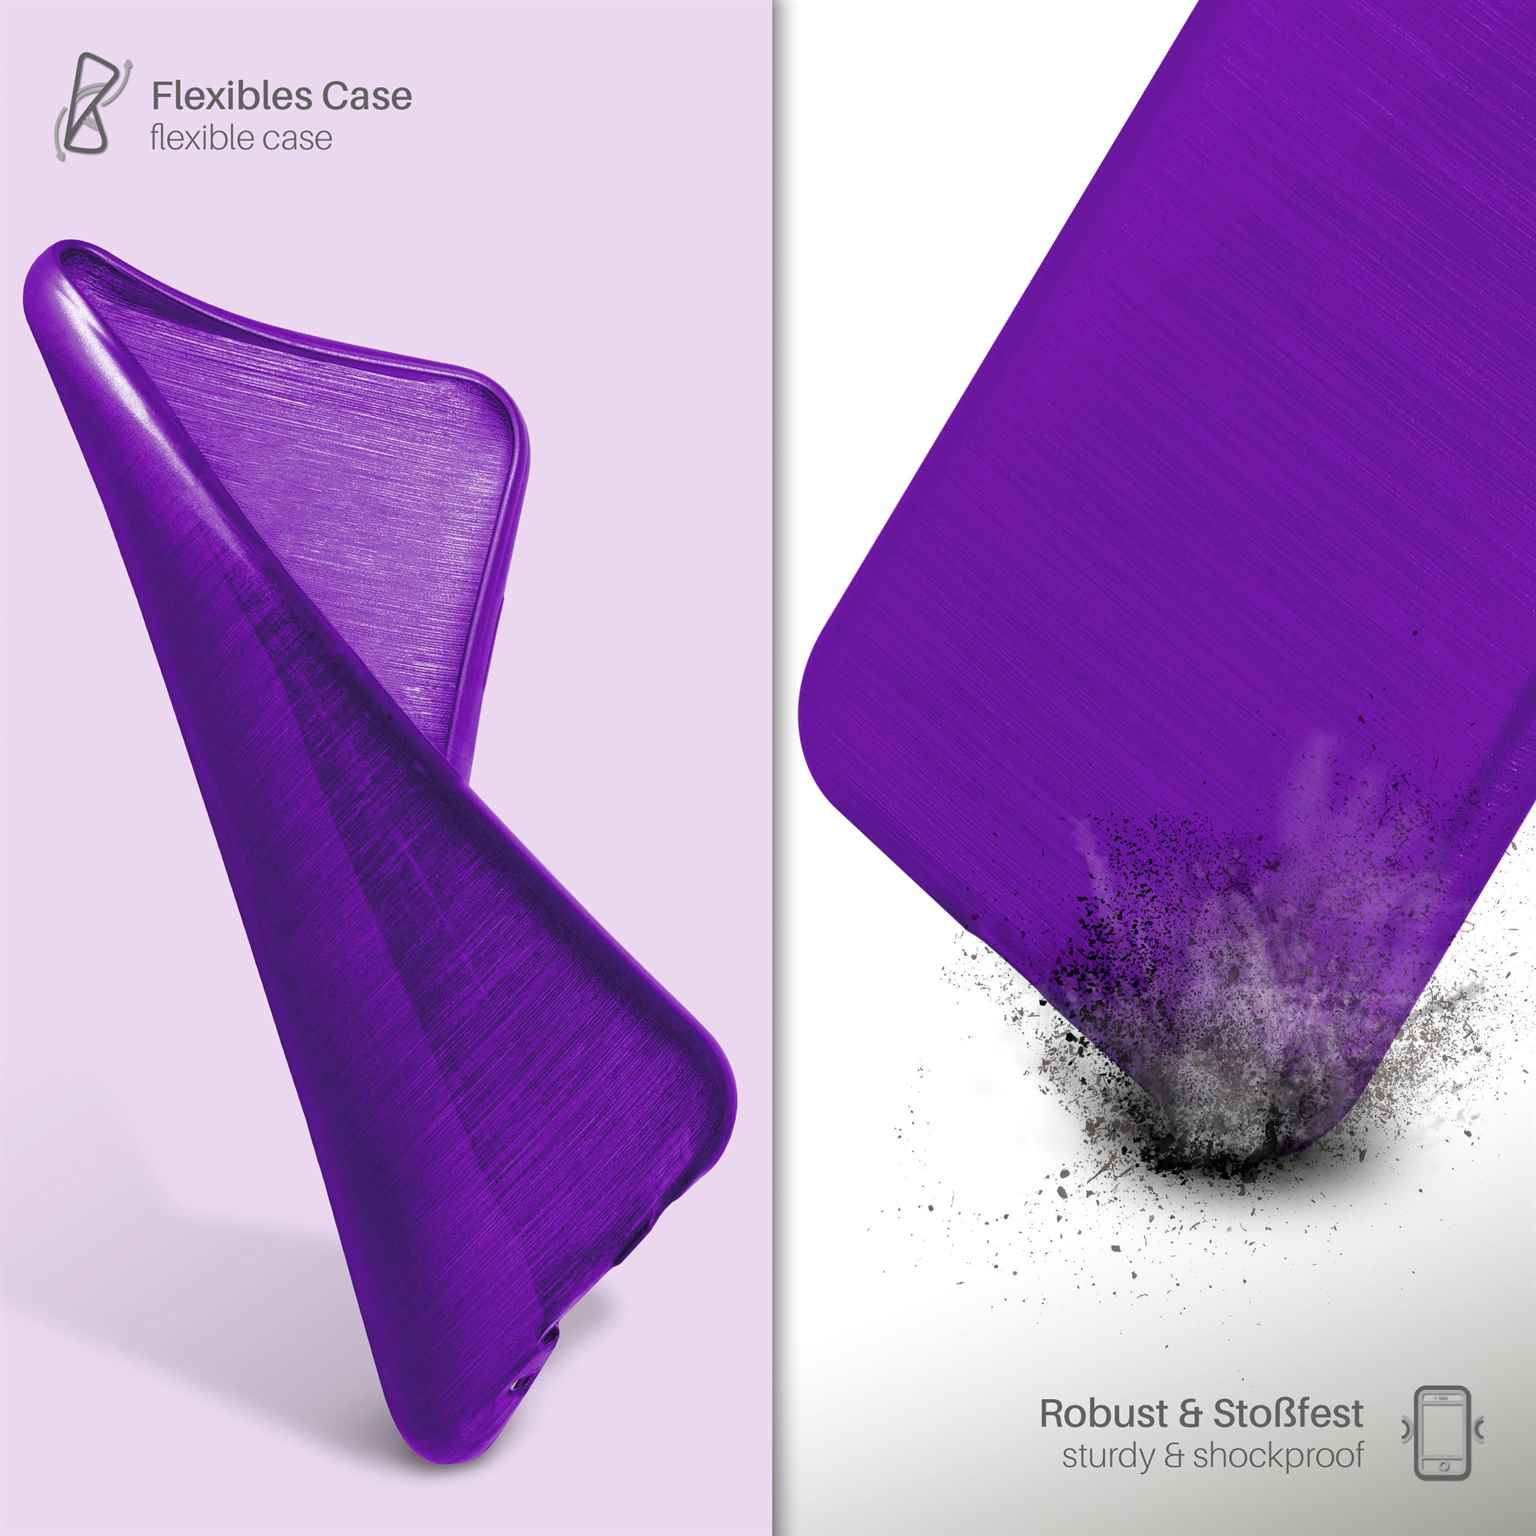 Brushed M8, One Case, Purpure-Purple HTC, Backcover, MOEX